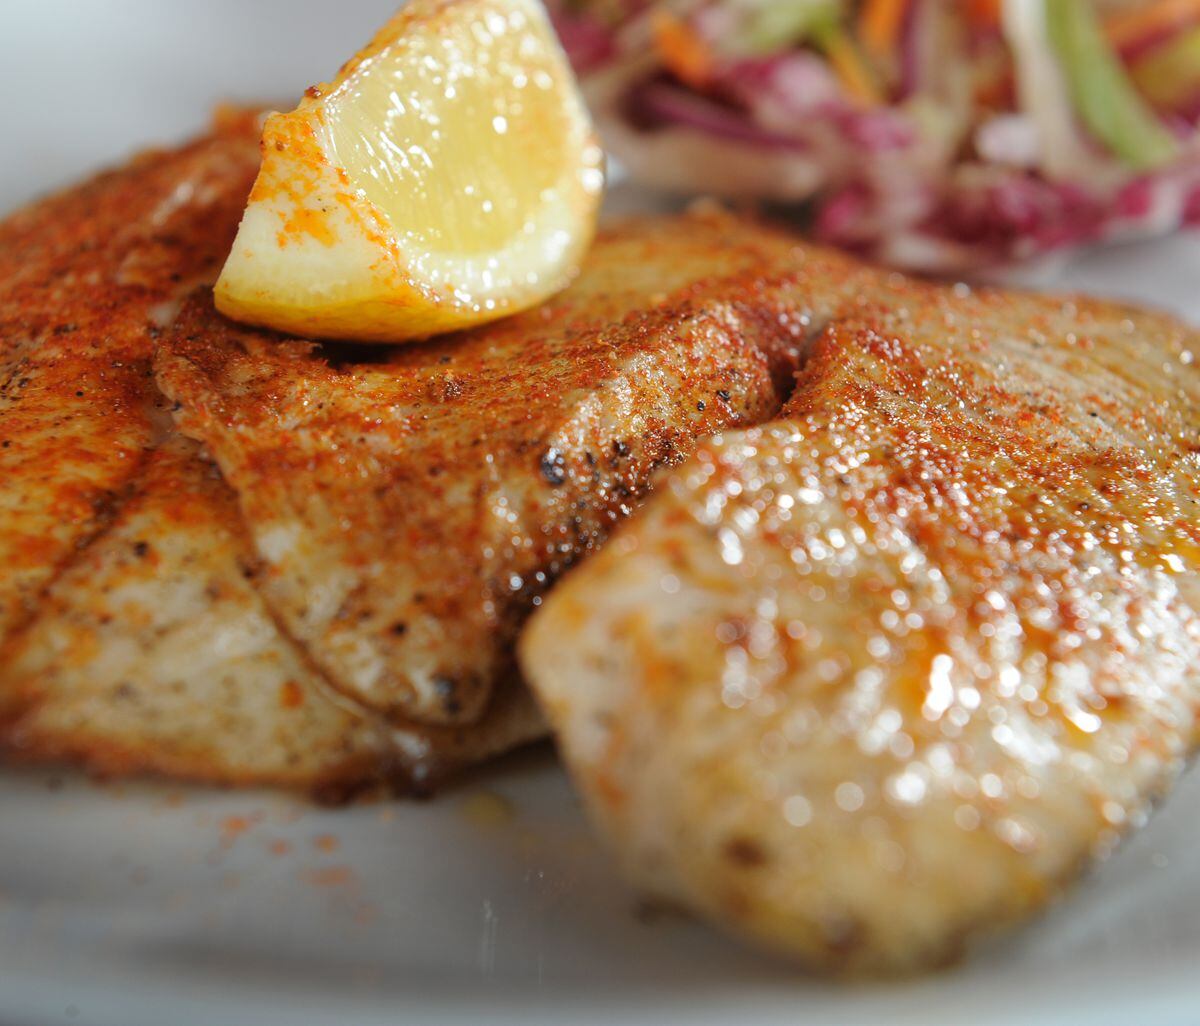 Tasty grilled fish cooked to perfection